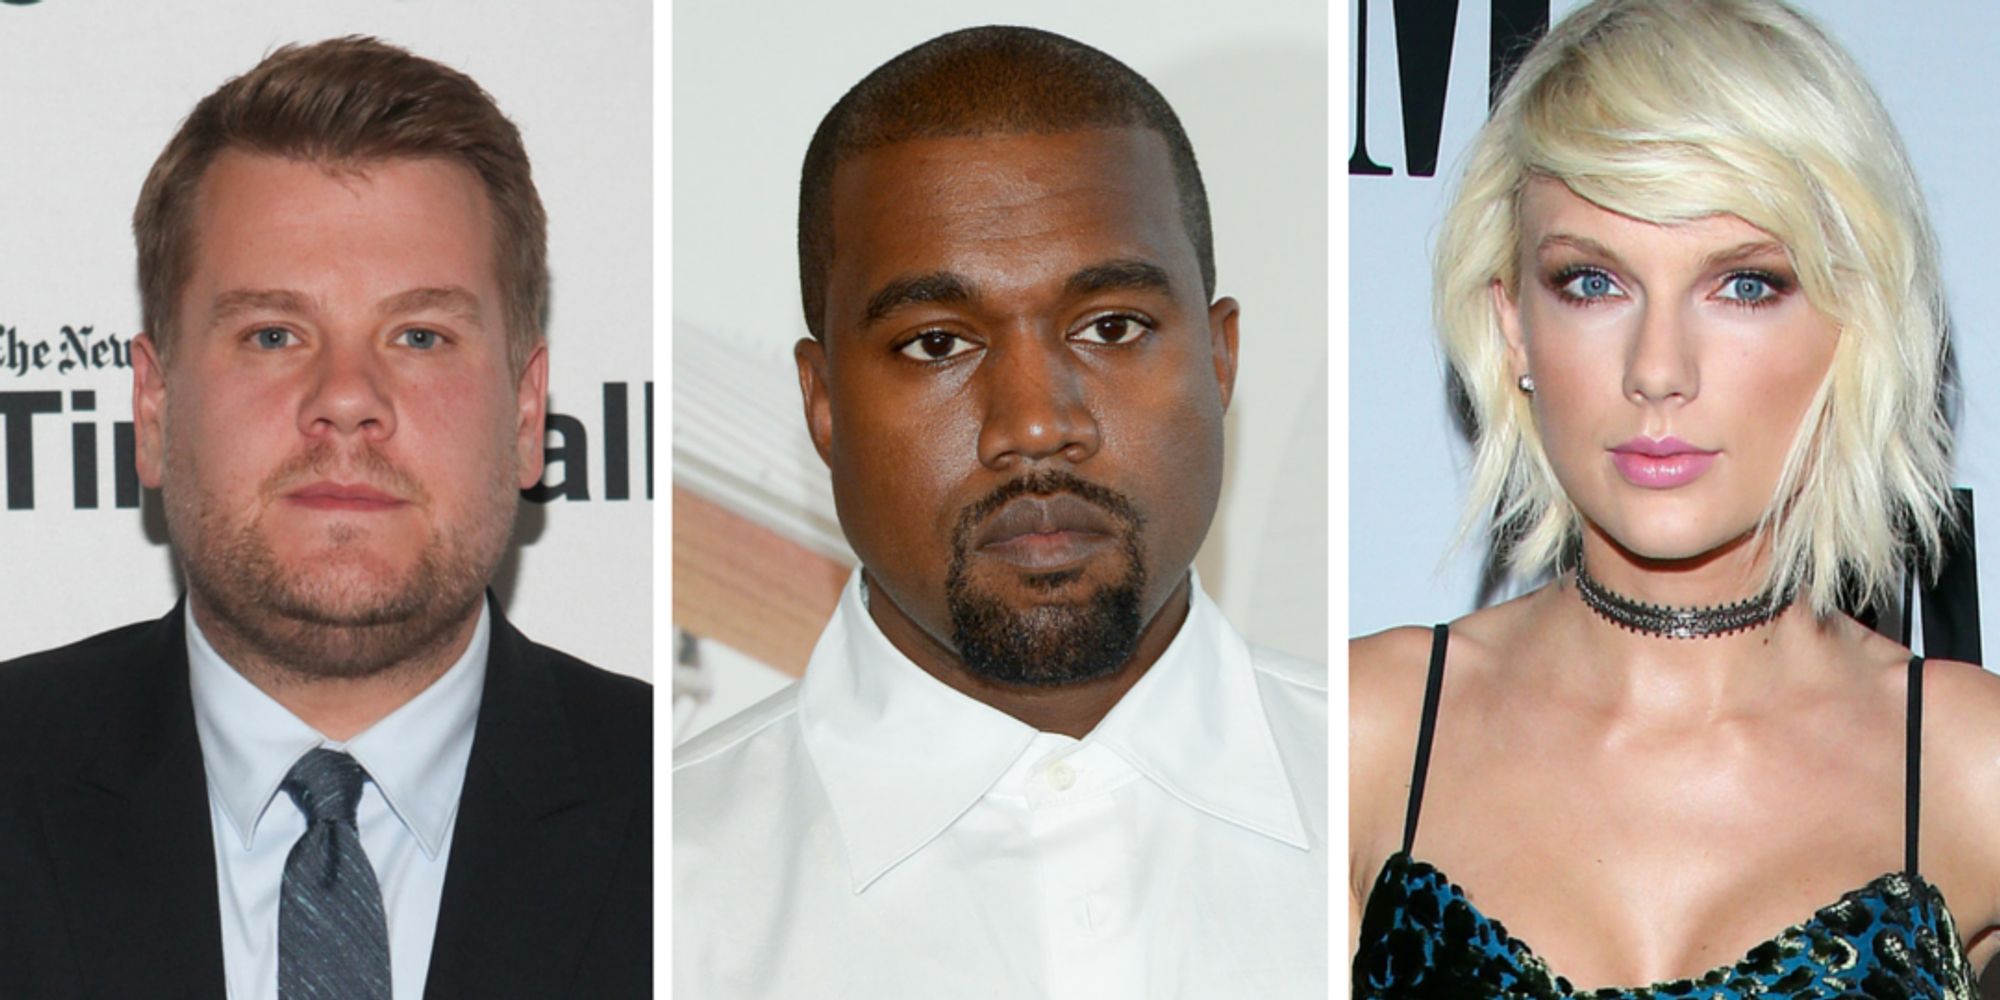 James Corden Hilariously Inserts Himself Into The Kim K, Kanye And Taylor Swift Narrative